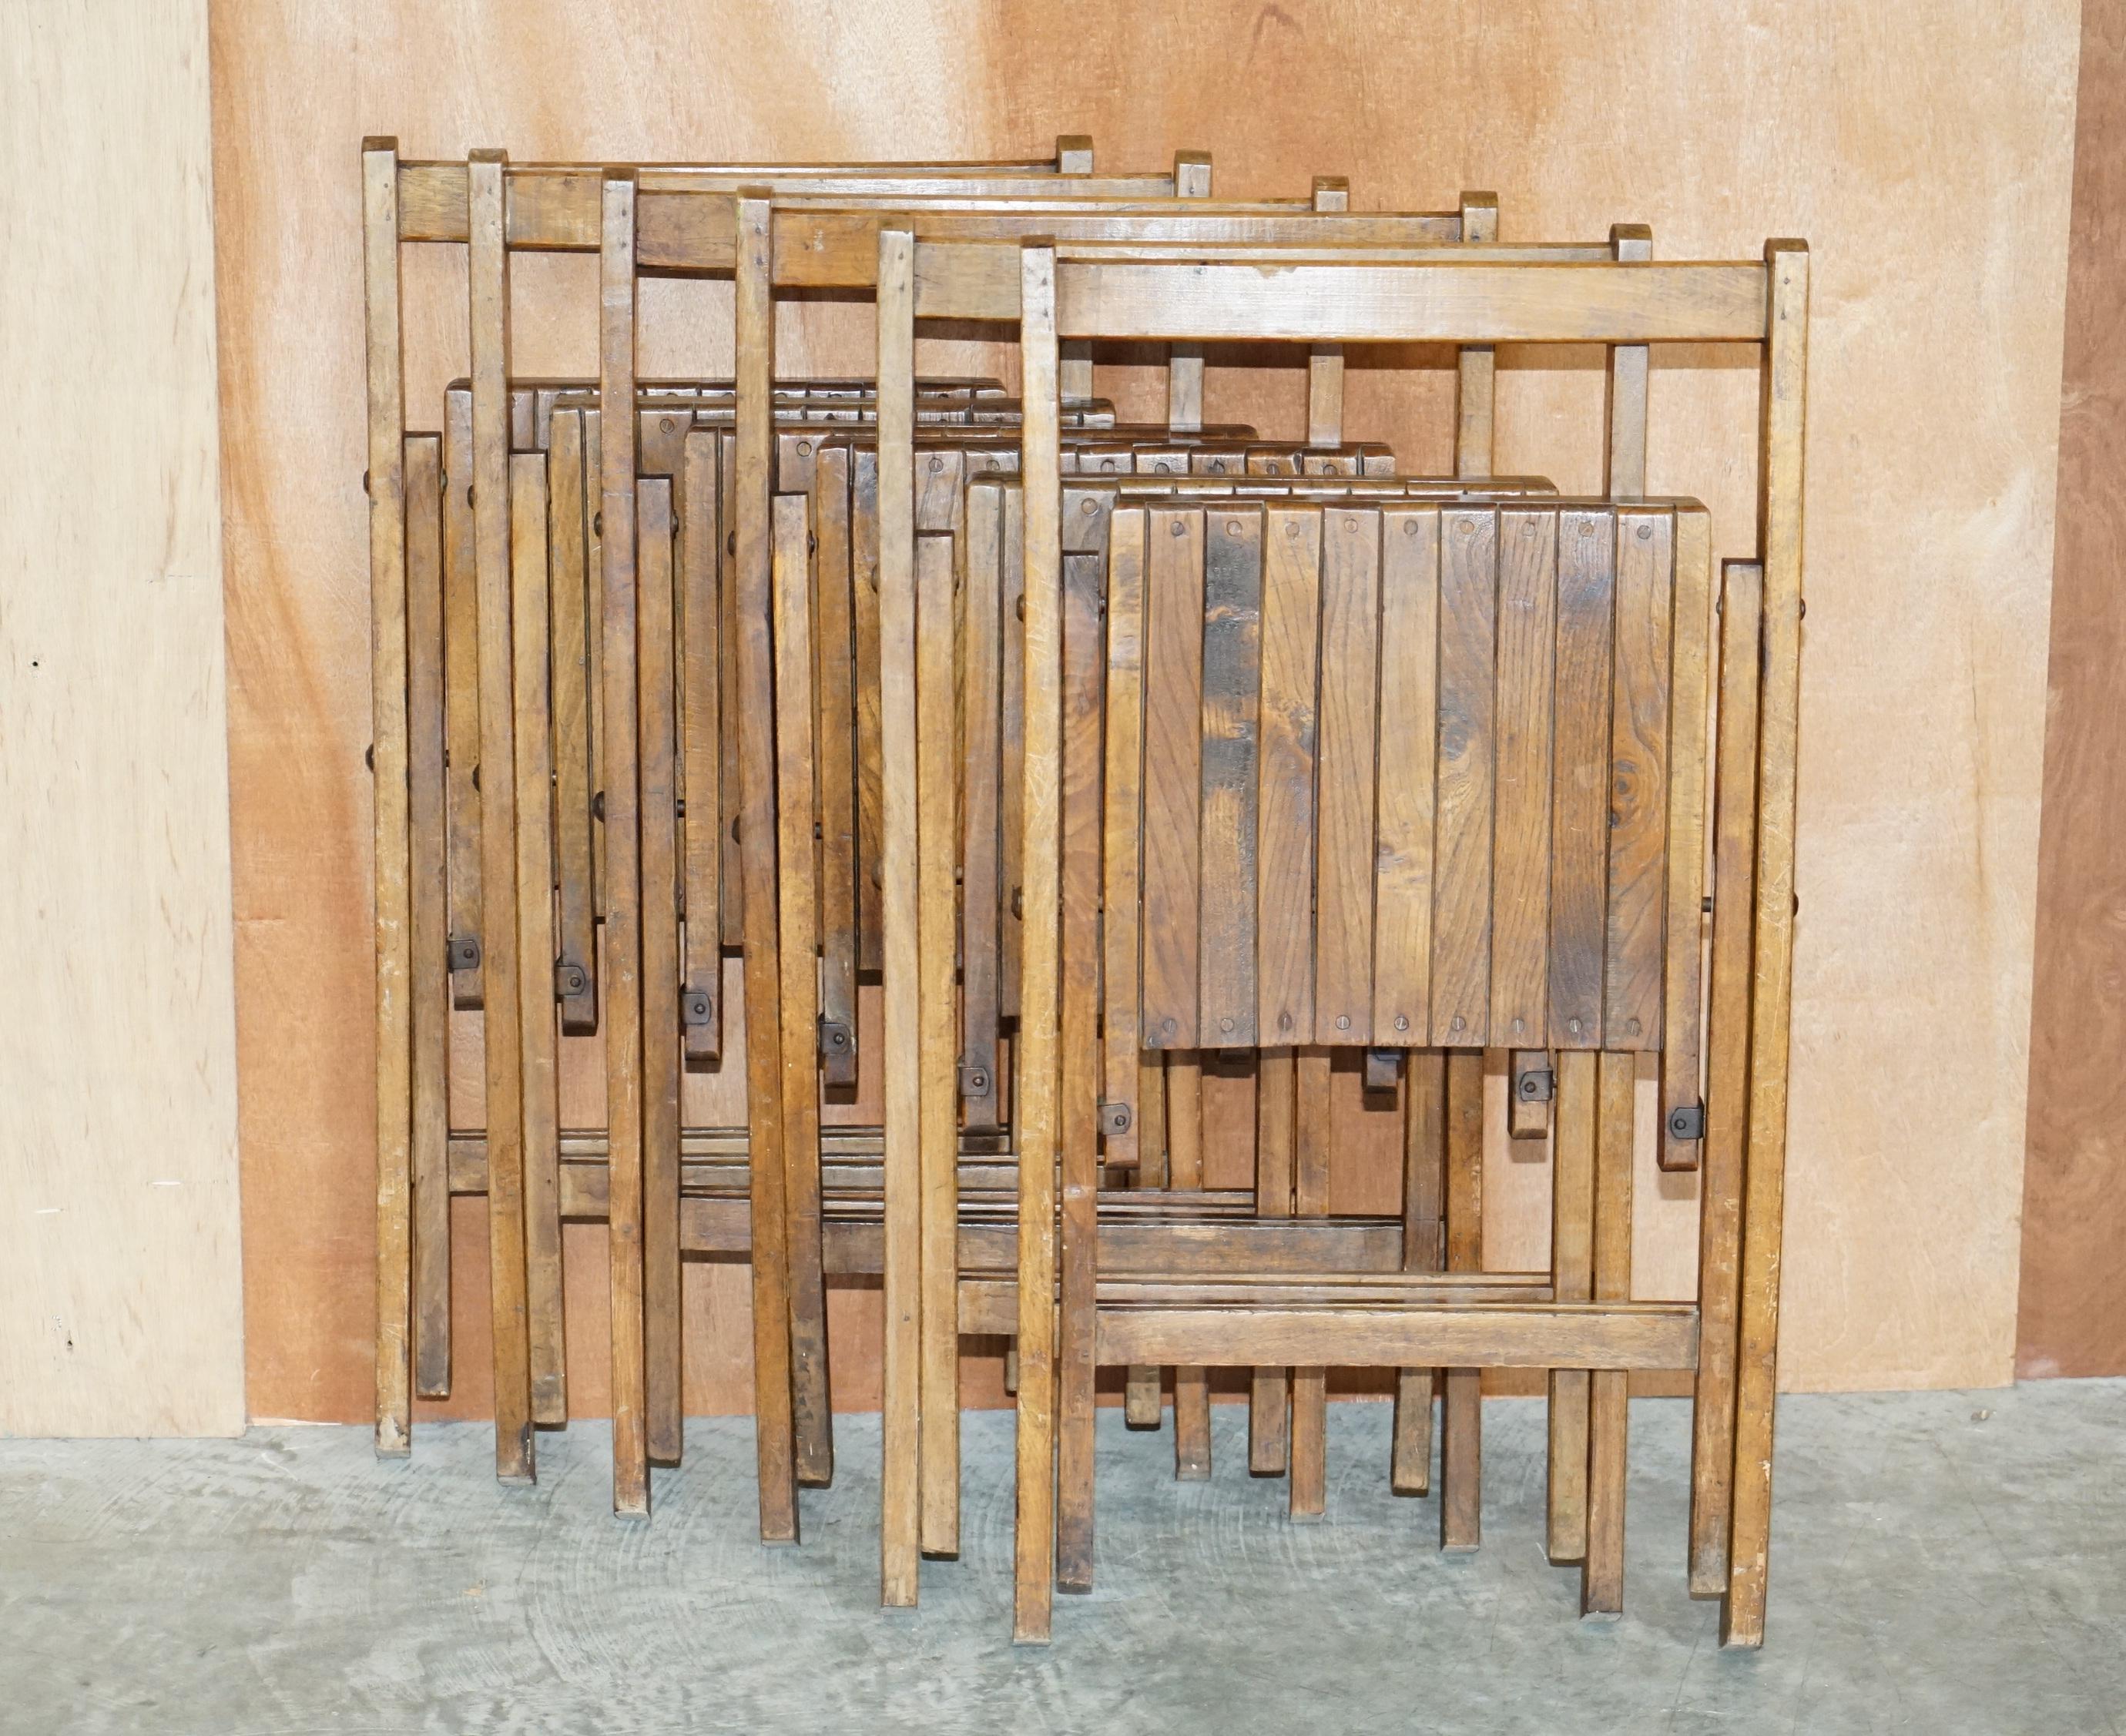 We are delighted to offer for sale this lovely suite of six original circa 1900-1920 English oak slatted folding steamer chairs

A very good looking well made and decorative suite of folding chairs with a lovely rich warm timber patina and